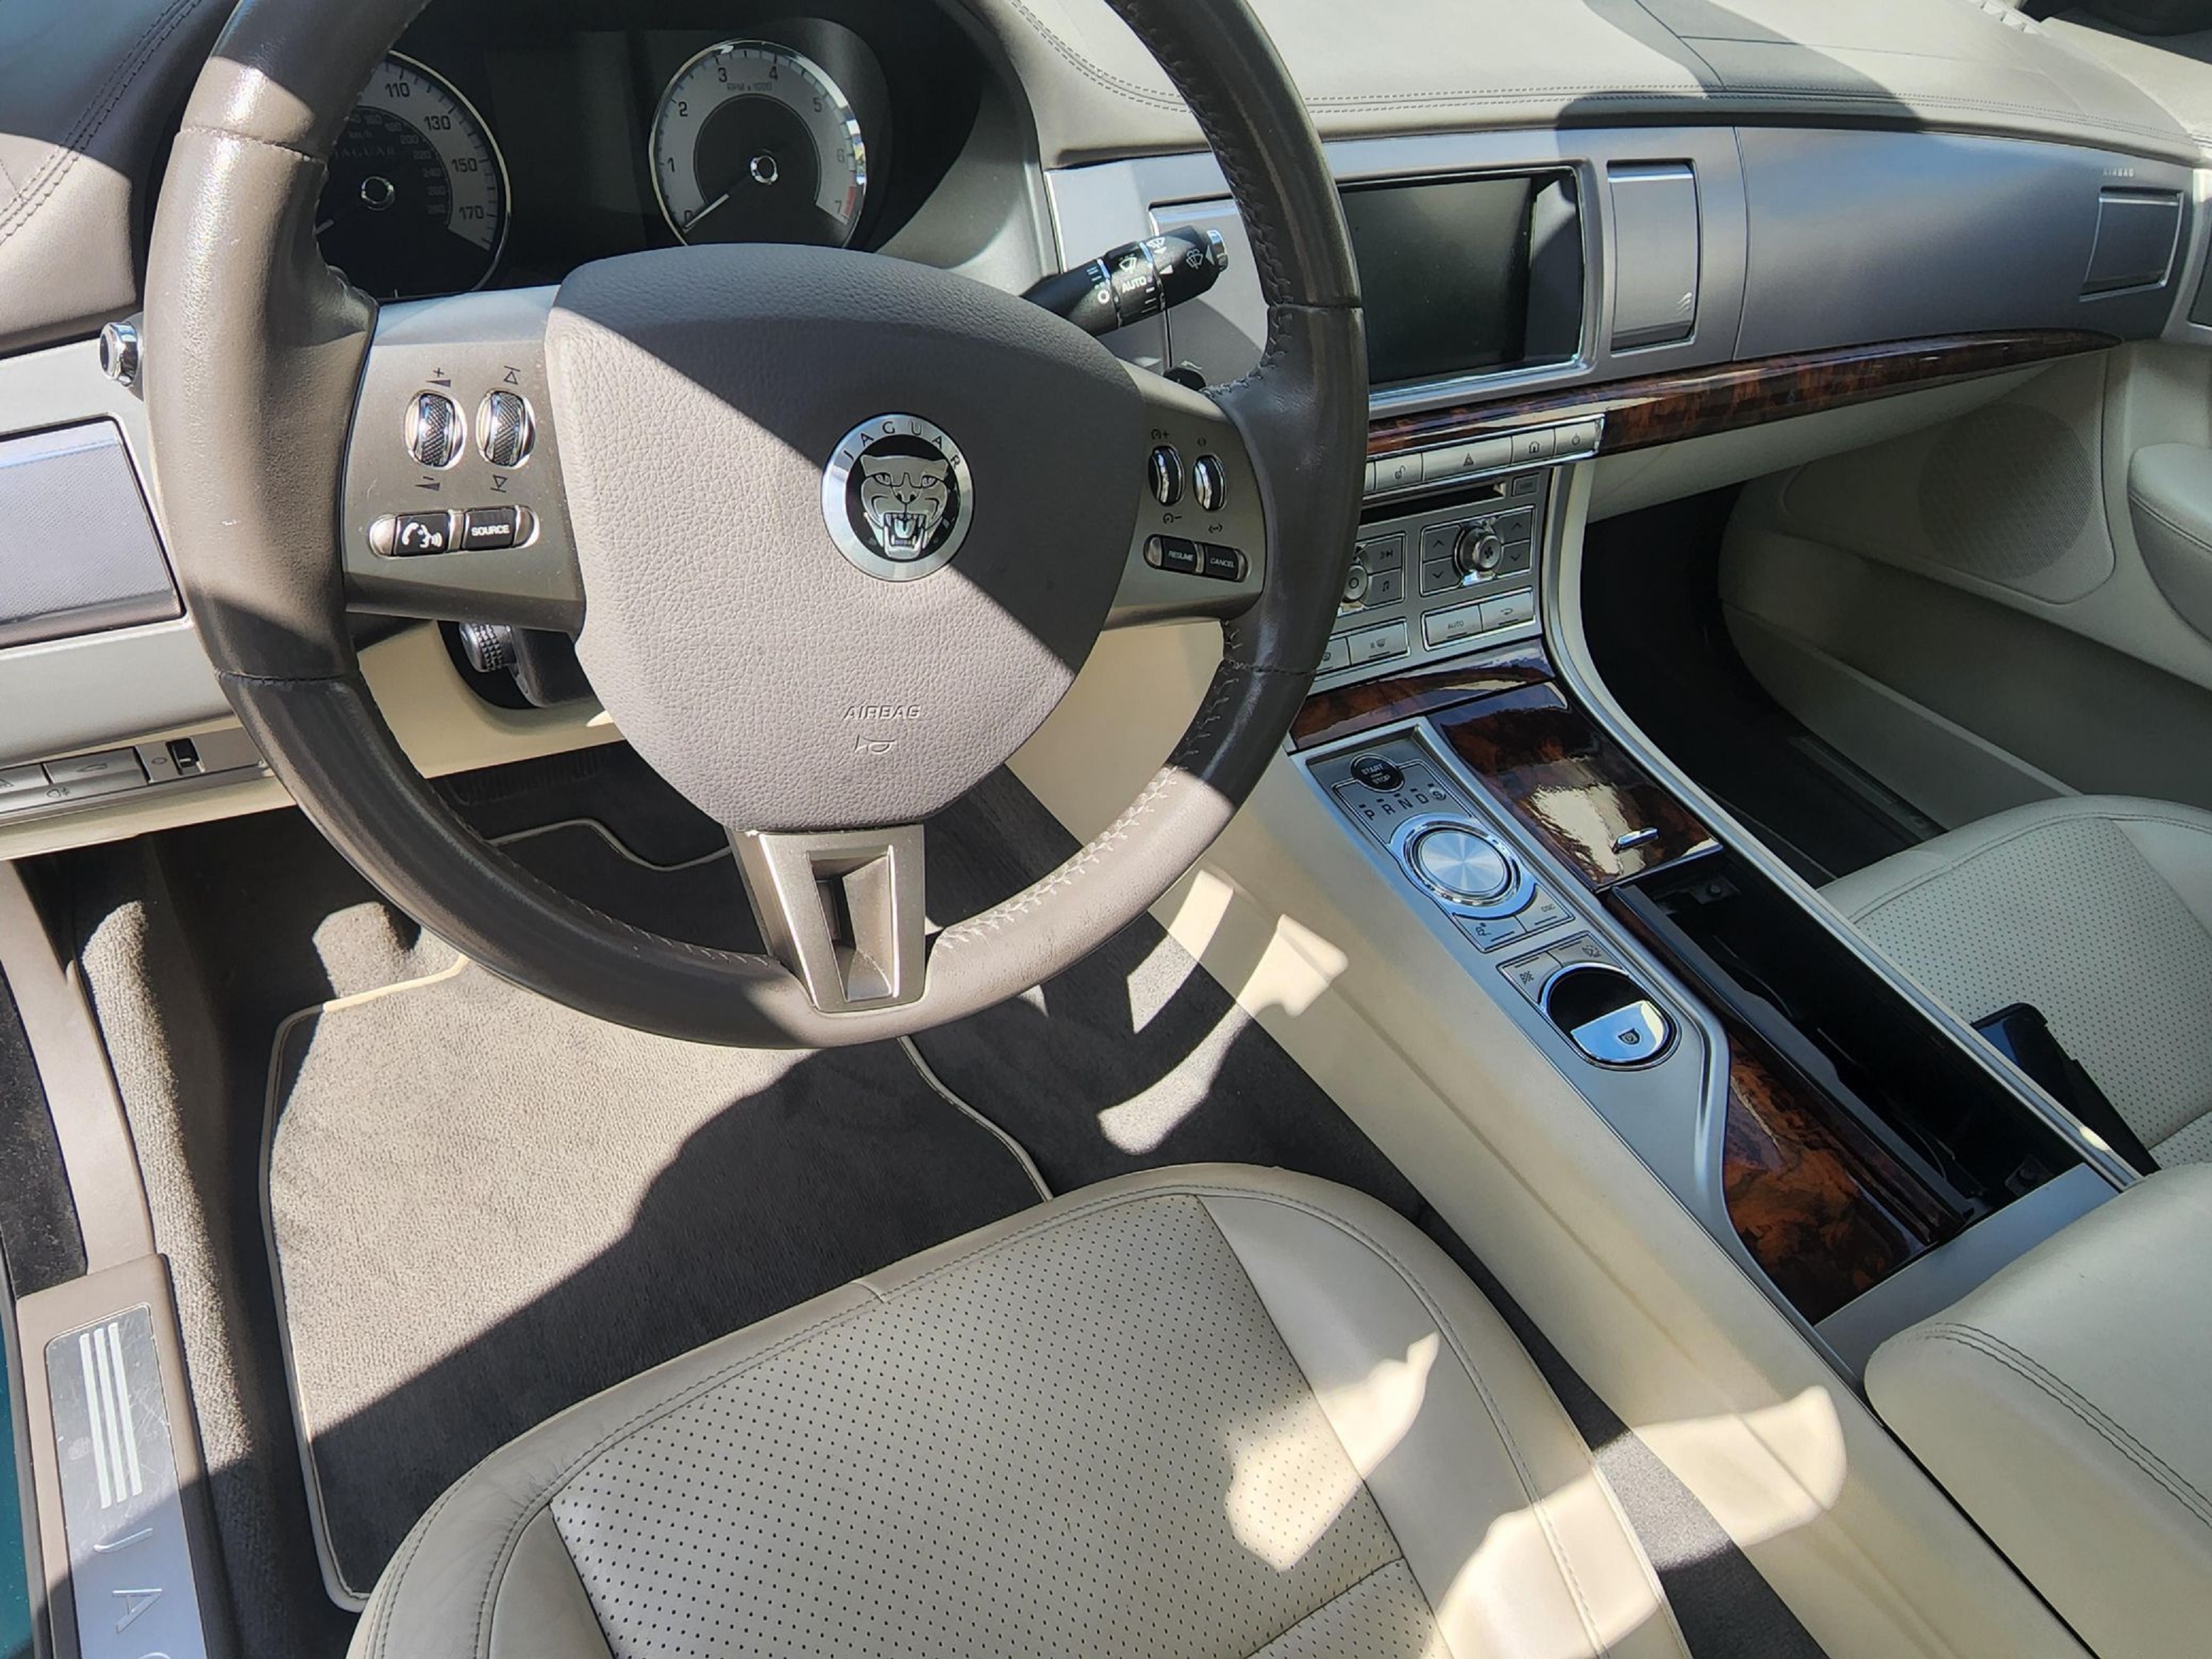 The tan-leather front seats and leather-upholstered dashboard of a used 2009 Jaguar XF Supercharged